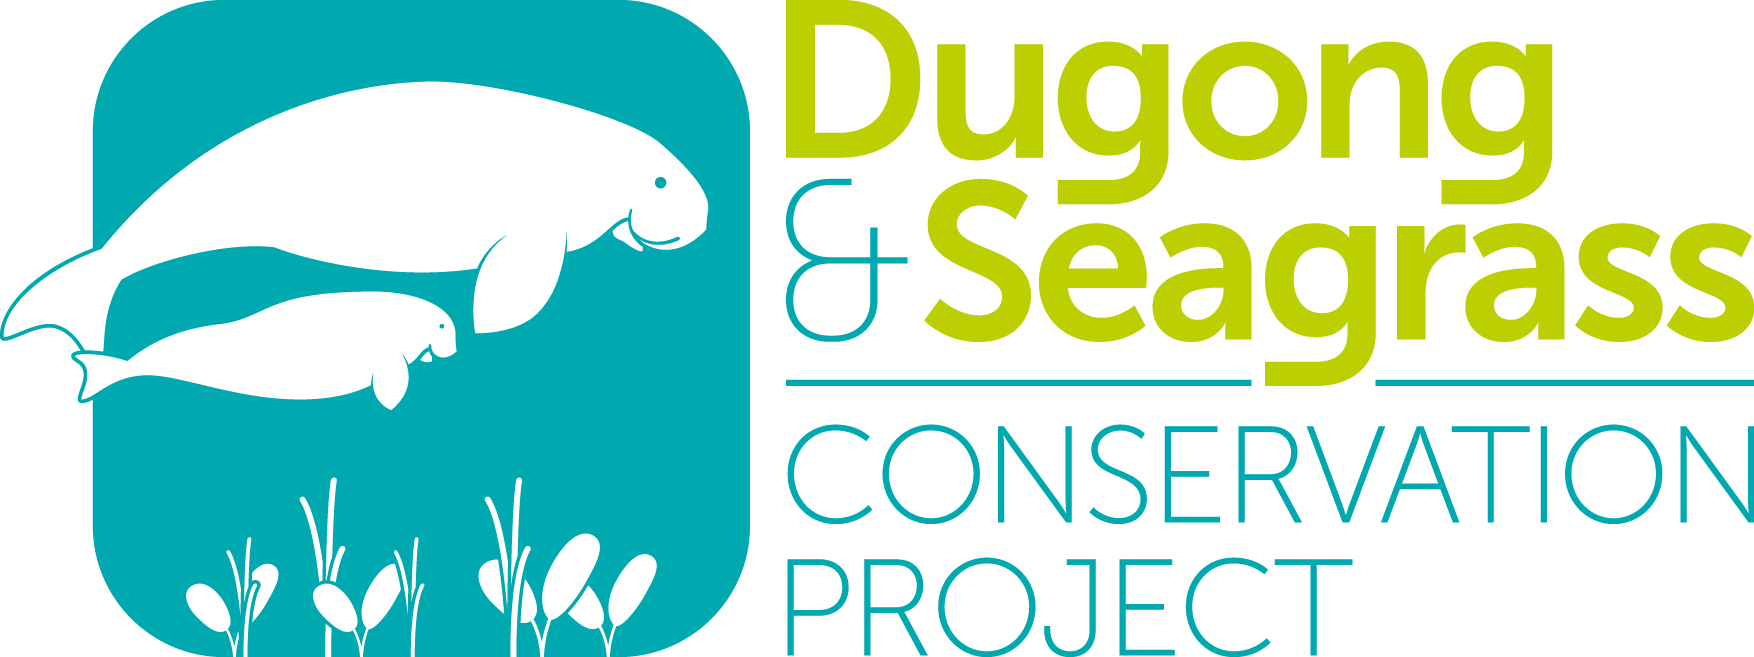 Dugong Logo - 26142201273_171c5e1acd_o - The Dugong & Seagrass Conservation Project